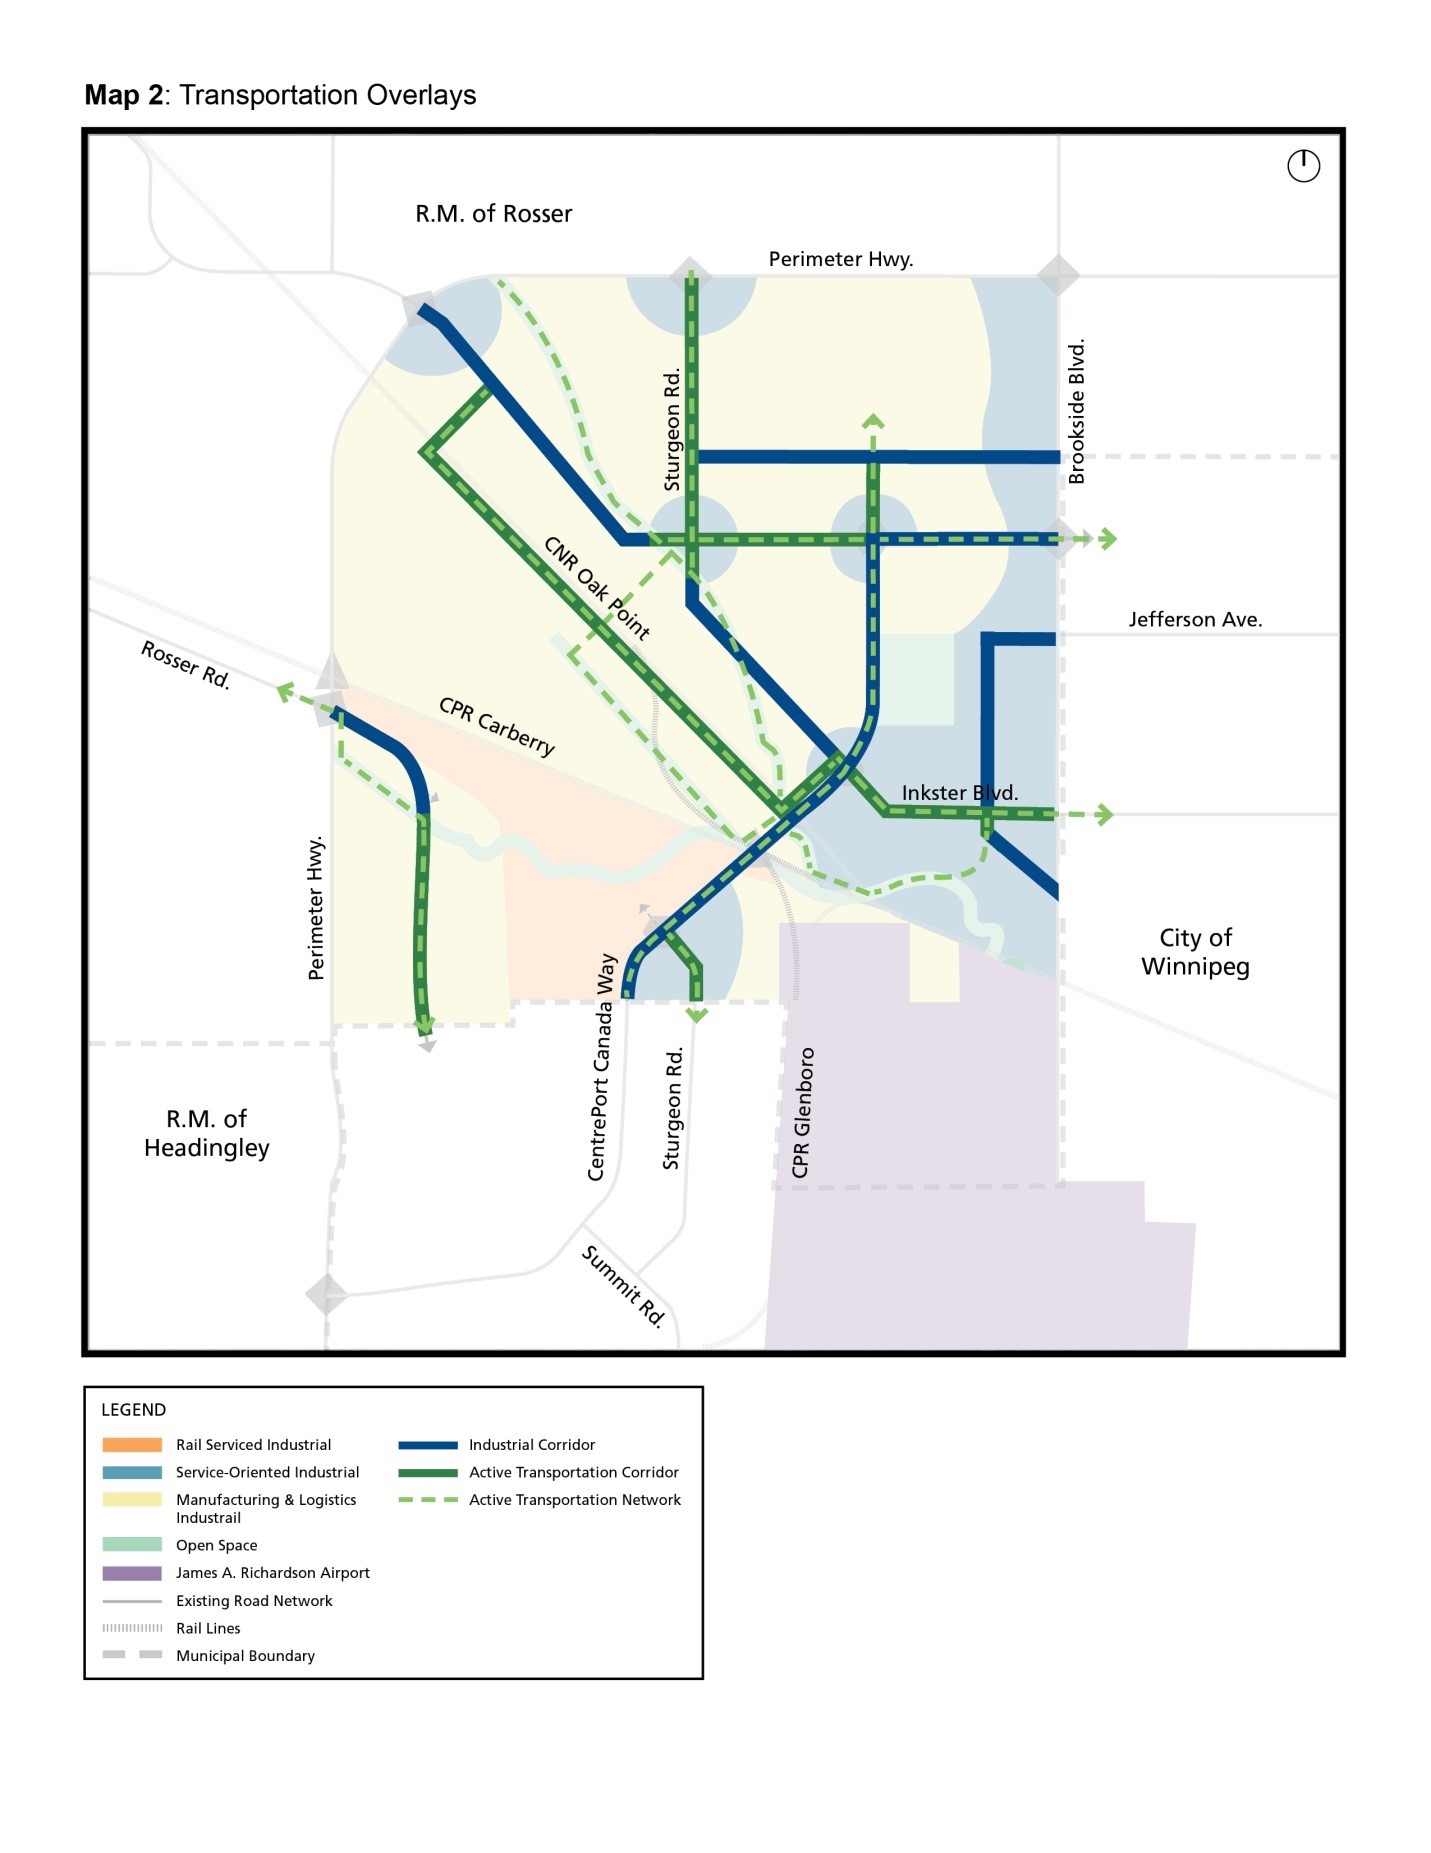 map of transportation overlays for CentrePort Canada area